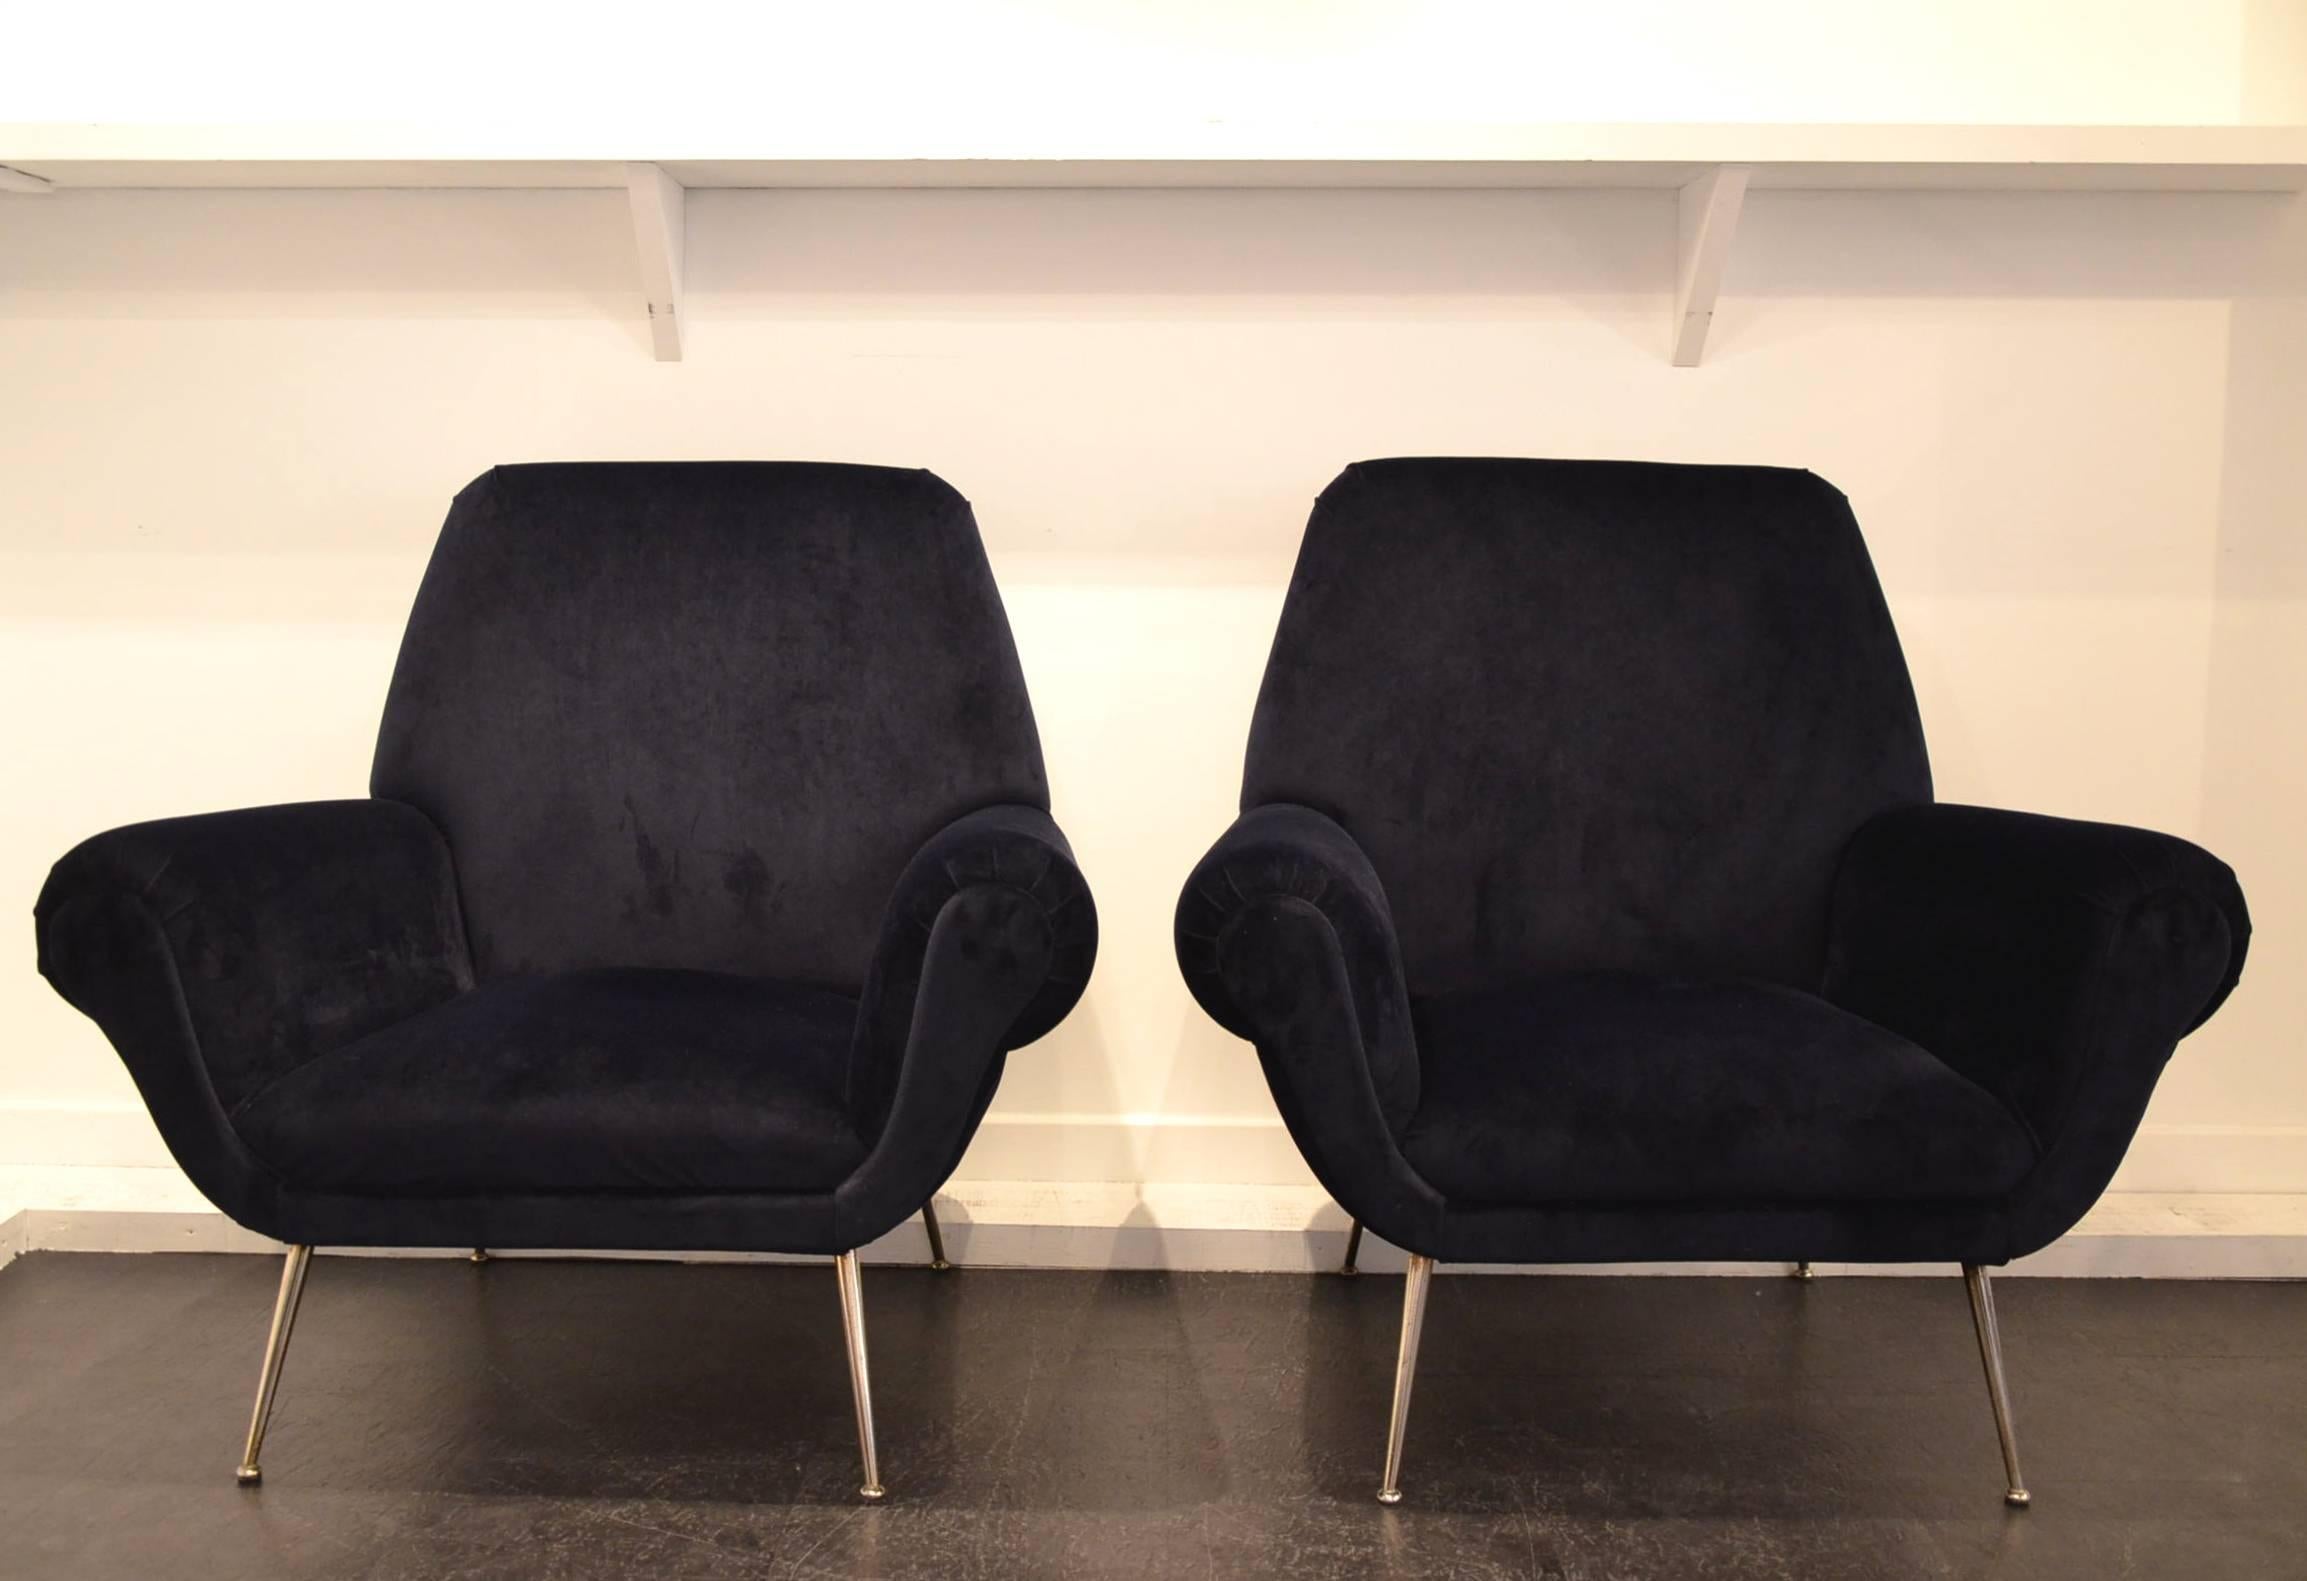 Gigi Radice Mid-Century club chairs reupholstered in a night blue velvet fabric.